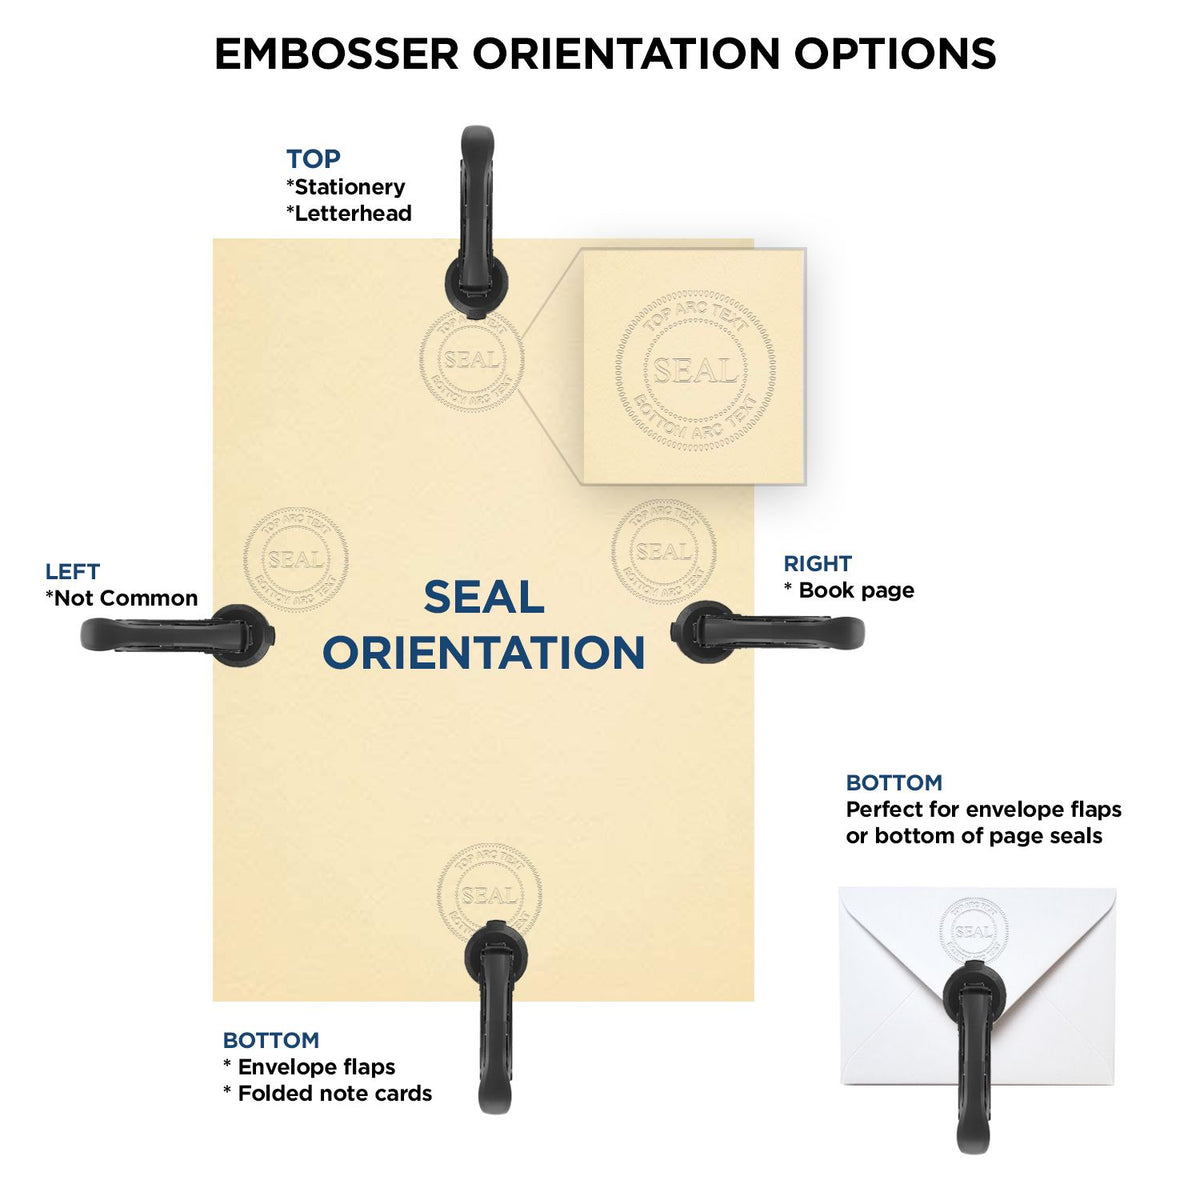 An infographic for the Handheld Tennessee Professional Geologist Embosser showing embosser orientation, this is showing examples of a top, bottom, right and left insert.